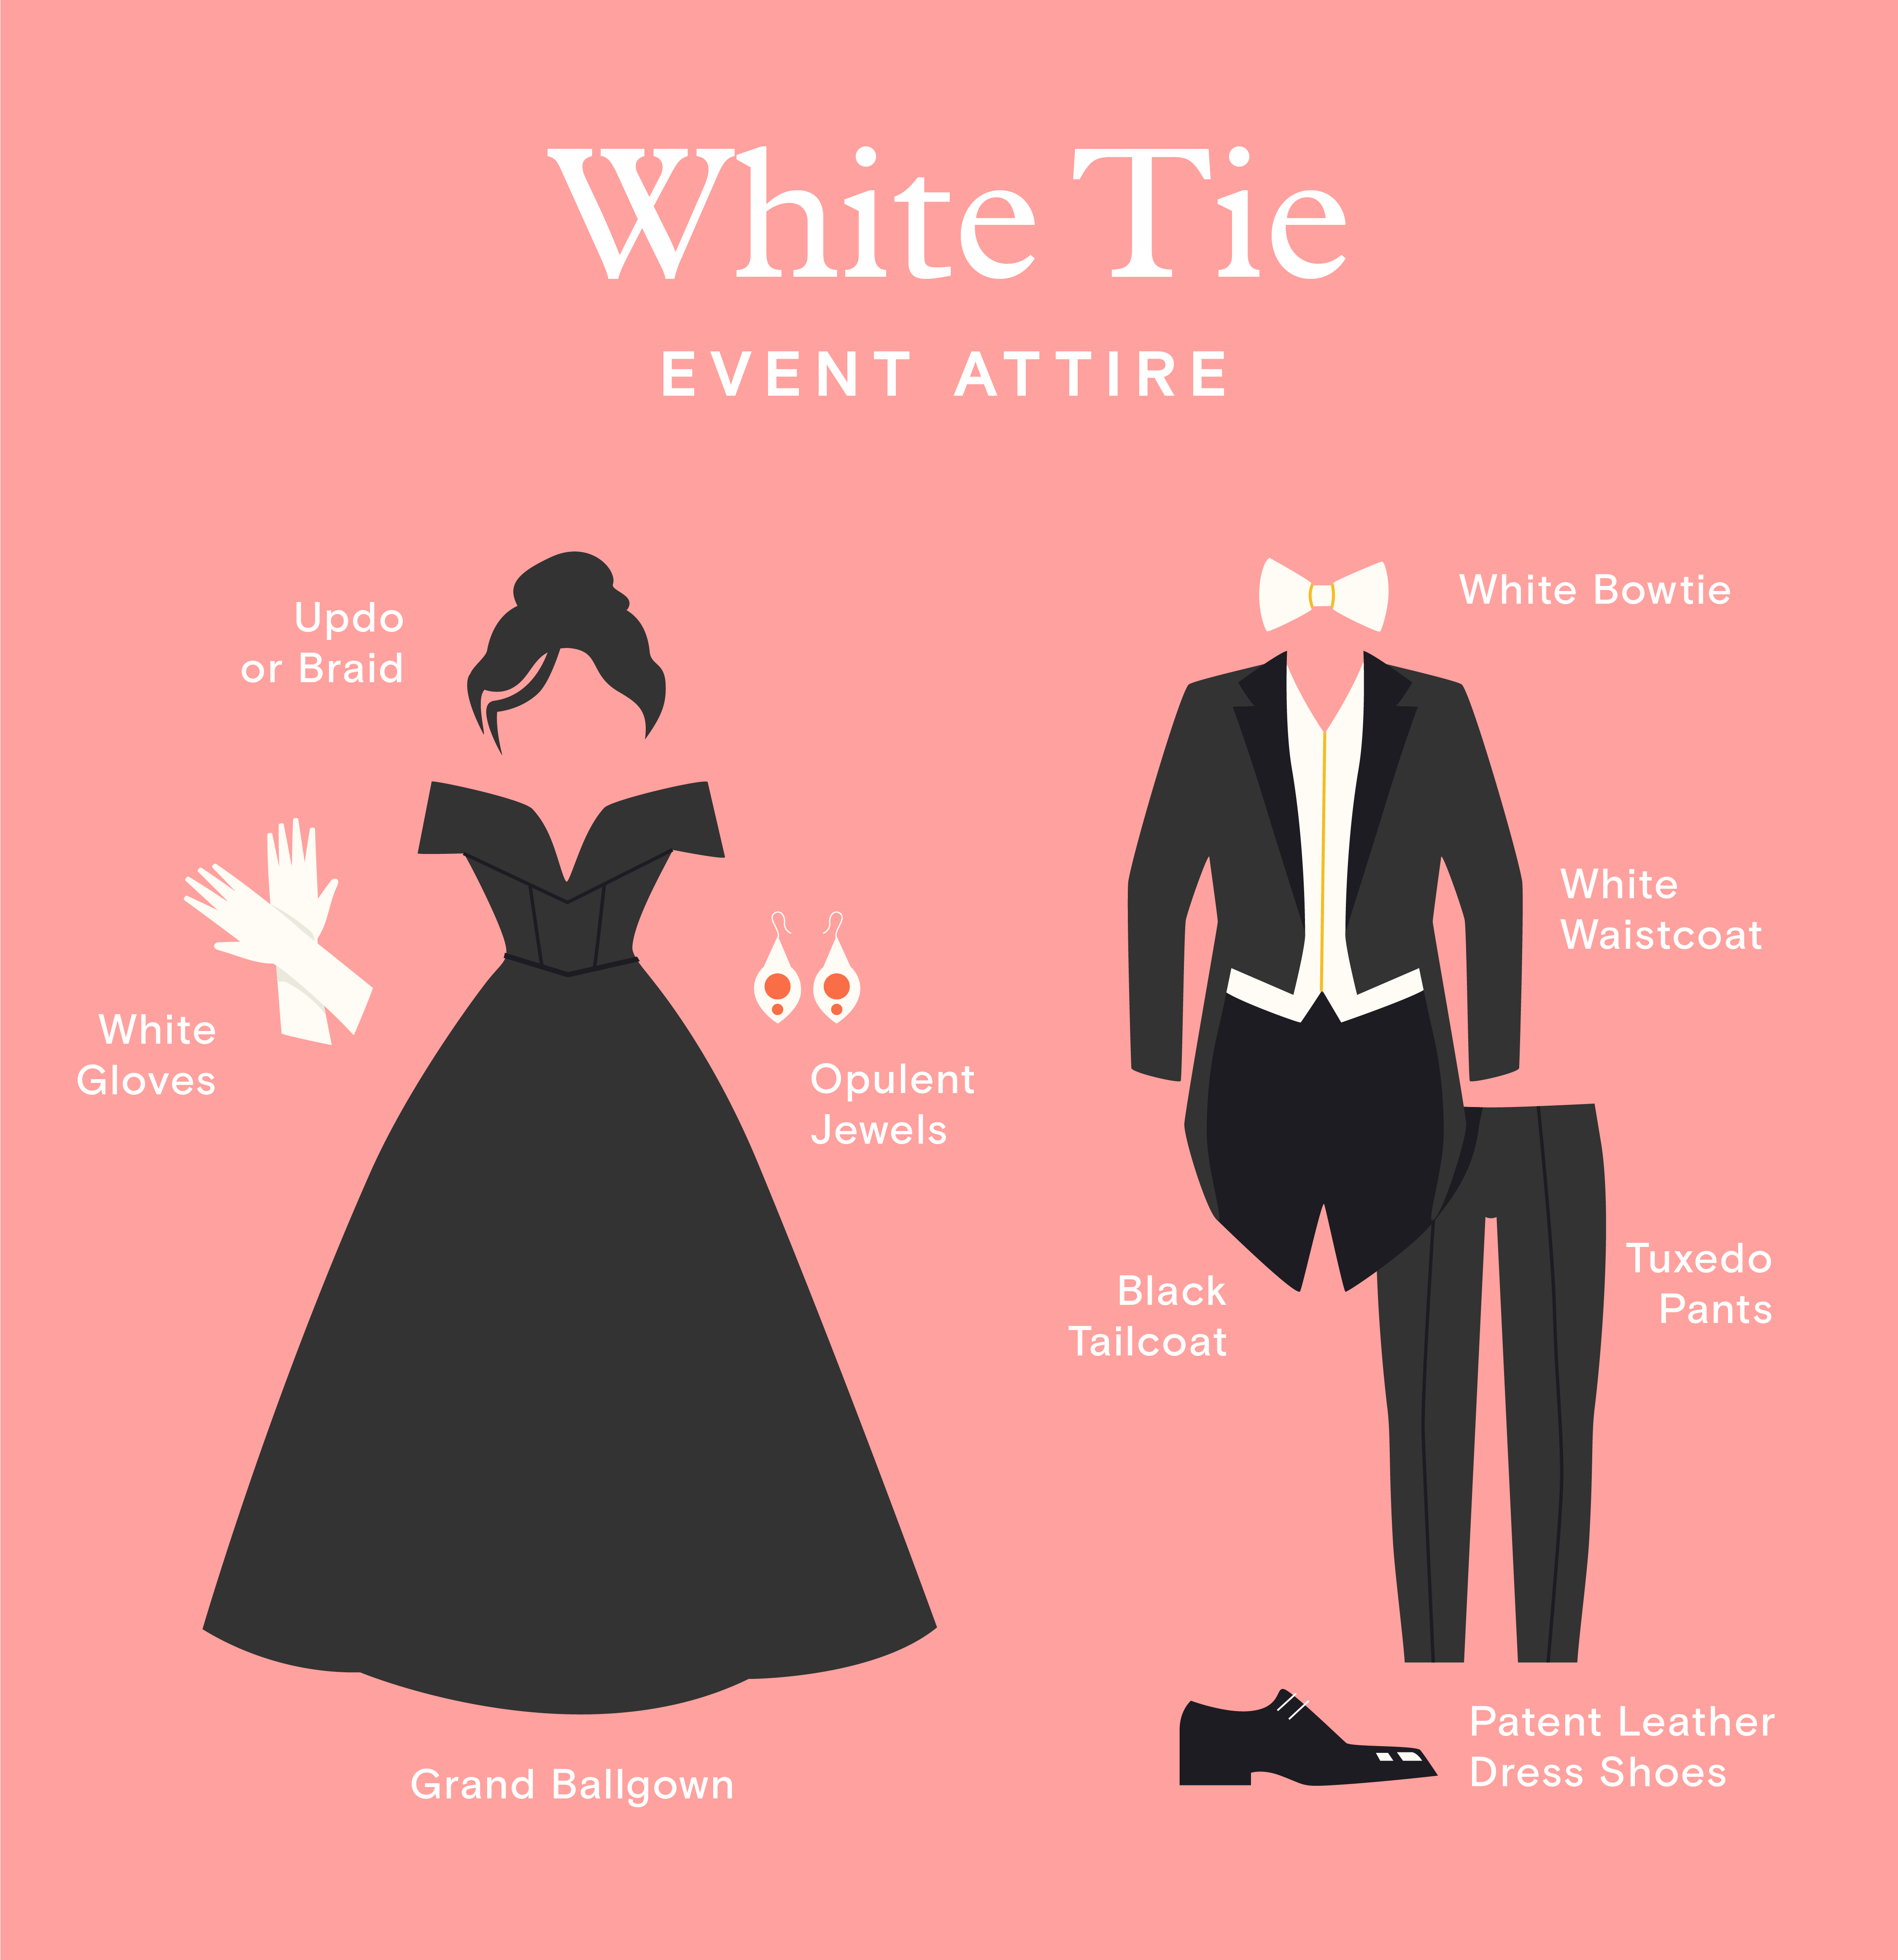 An illustration of white tie attire for women and for men featuring items from the list like white gloves, black tailcoat, and more.